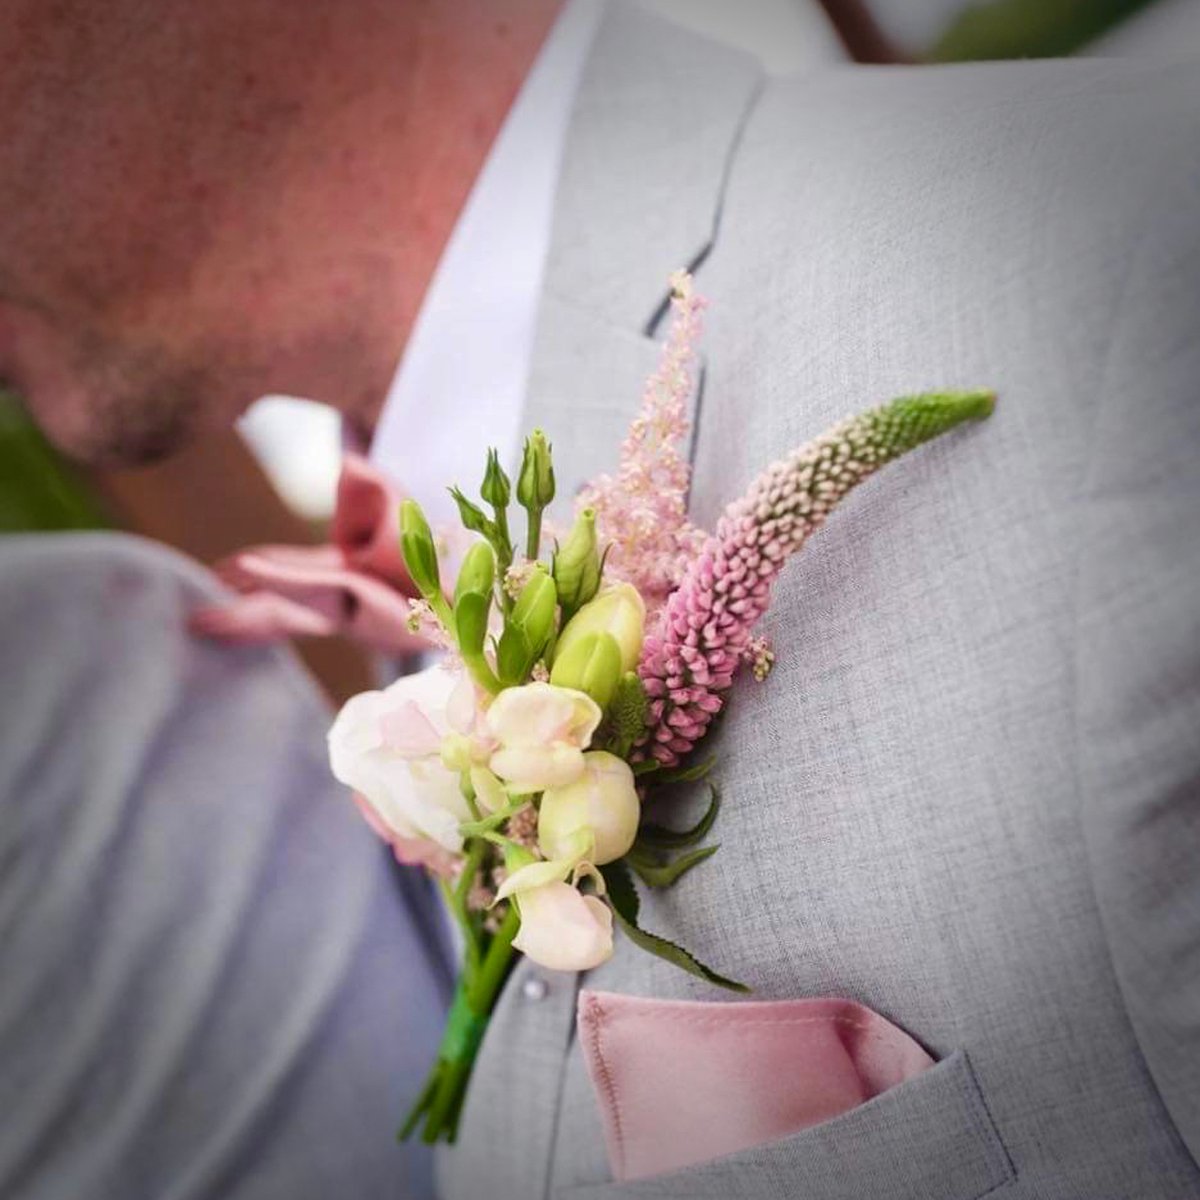 Rocking the buttonhole - Not all buttonholes have to be roses 🌿
#WeddingCeremony #CeremonyFlowers #WeddingFlowers #WeddingFlorist #WeddingDayMemories #Hertfordshire #HemelHempstead #MaplesFlowers